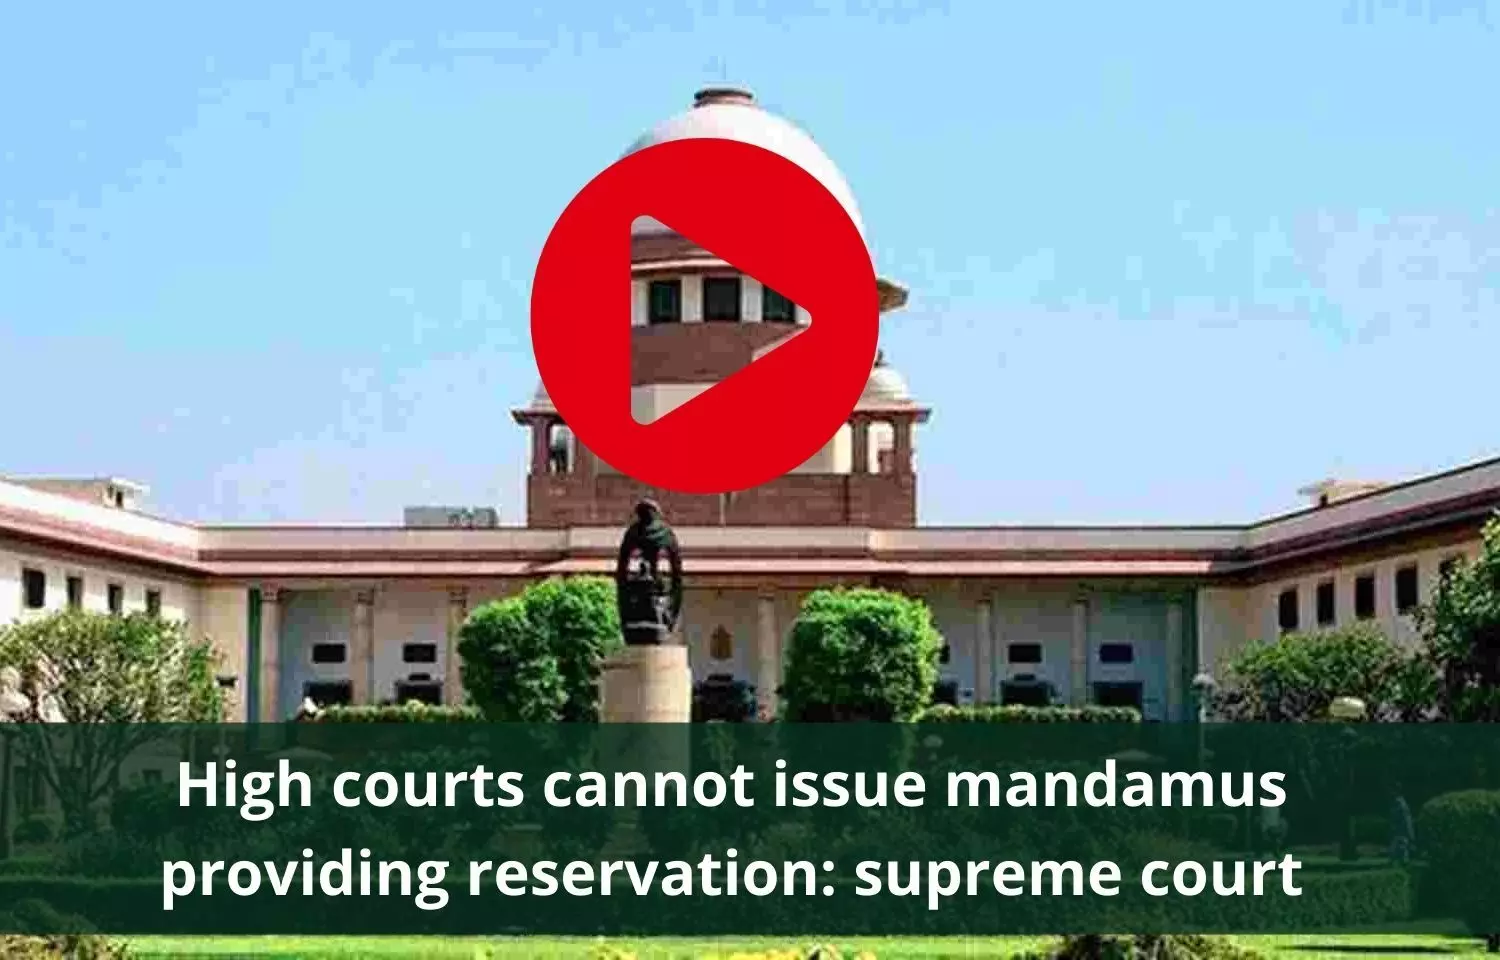 Mandamus cannot be issued to provide for reservation: SC